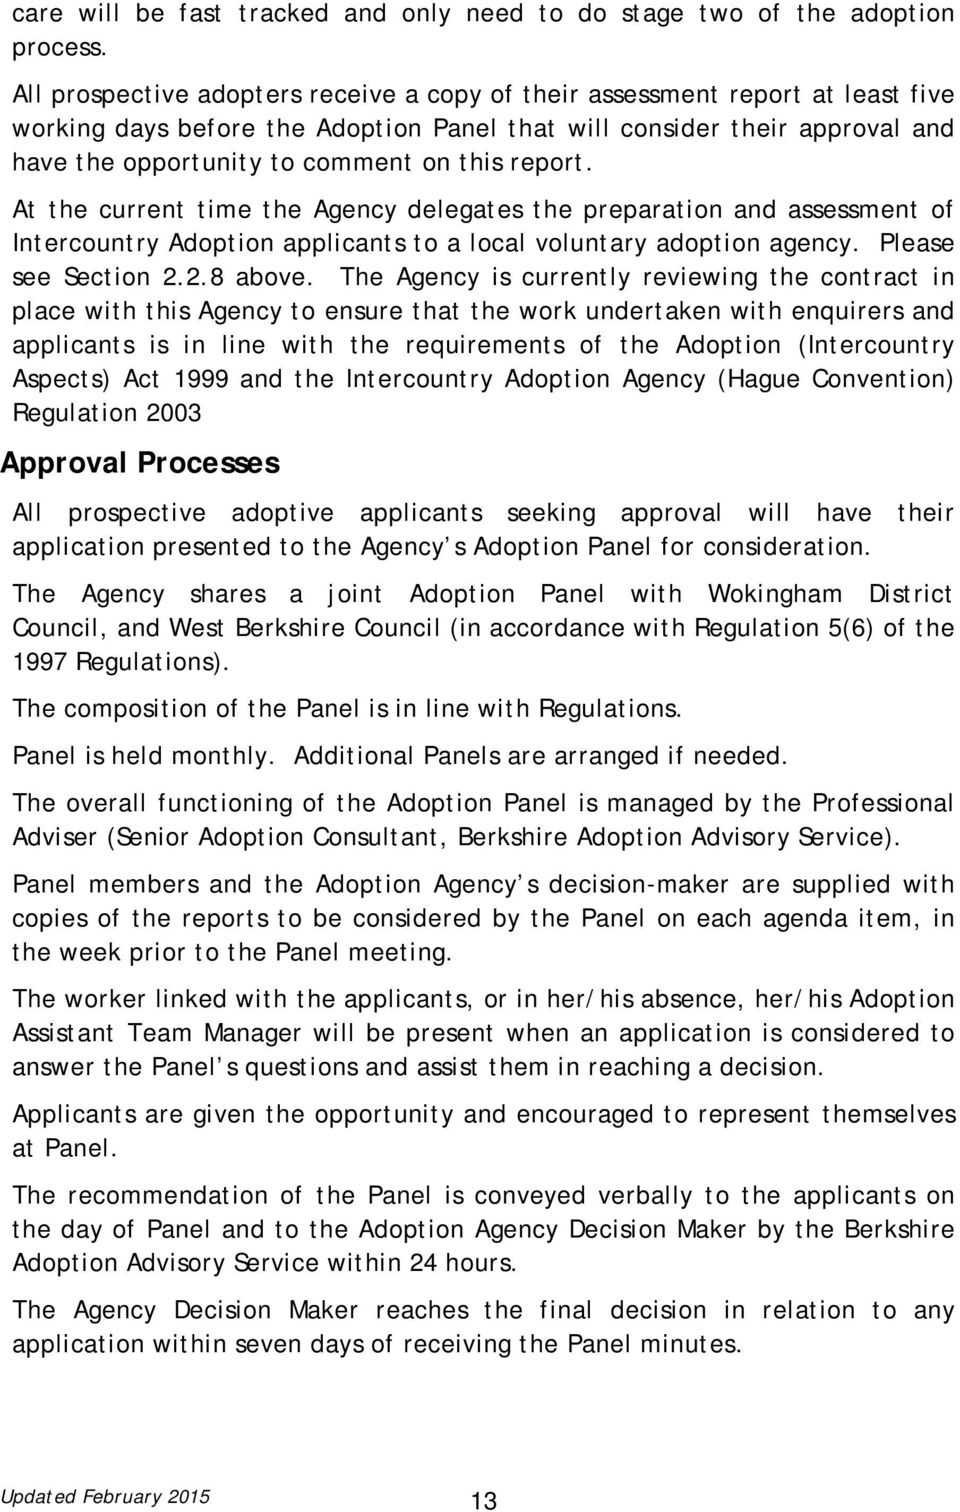 report. At the current time the Agency delegates the preparation and assessment of Intercountry Adoption applicants to a local voluntary adoption agency. Please see Section 2.2.8 above.